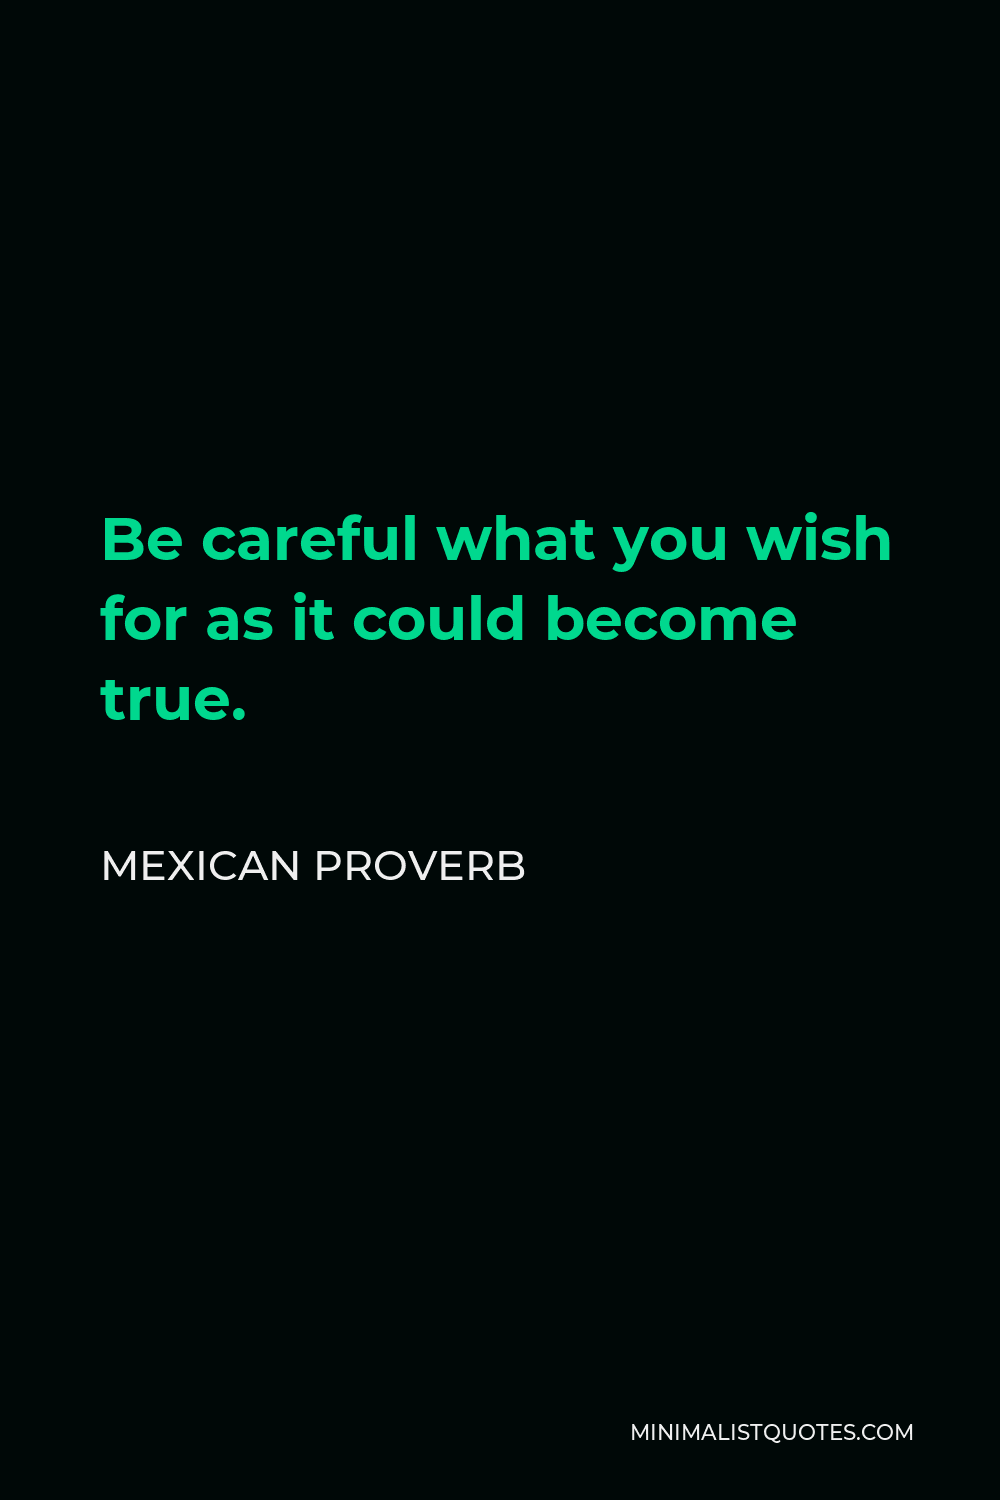 Mexican Proverb Quote - Be careful what you wish for as it could become true.